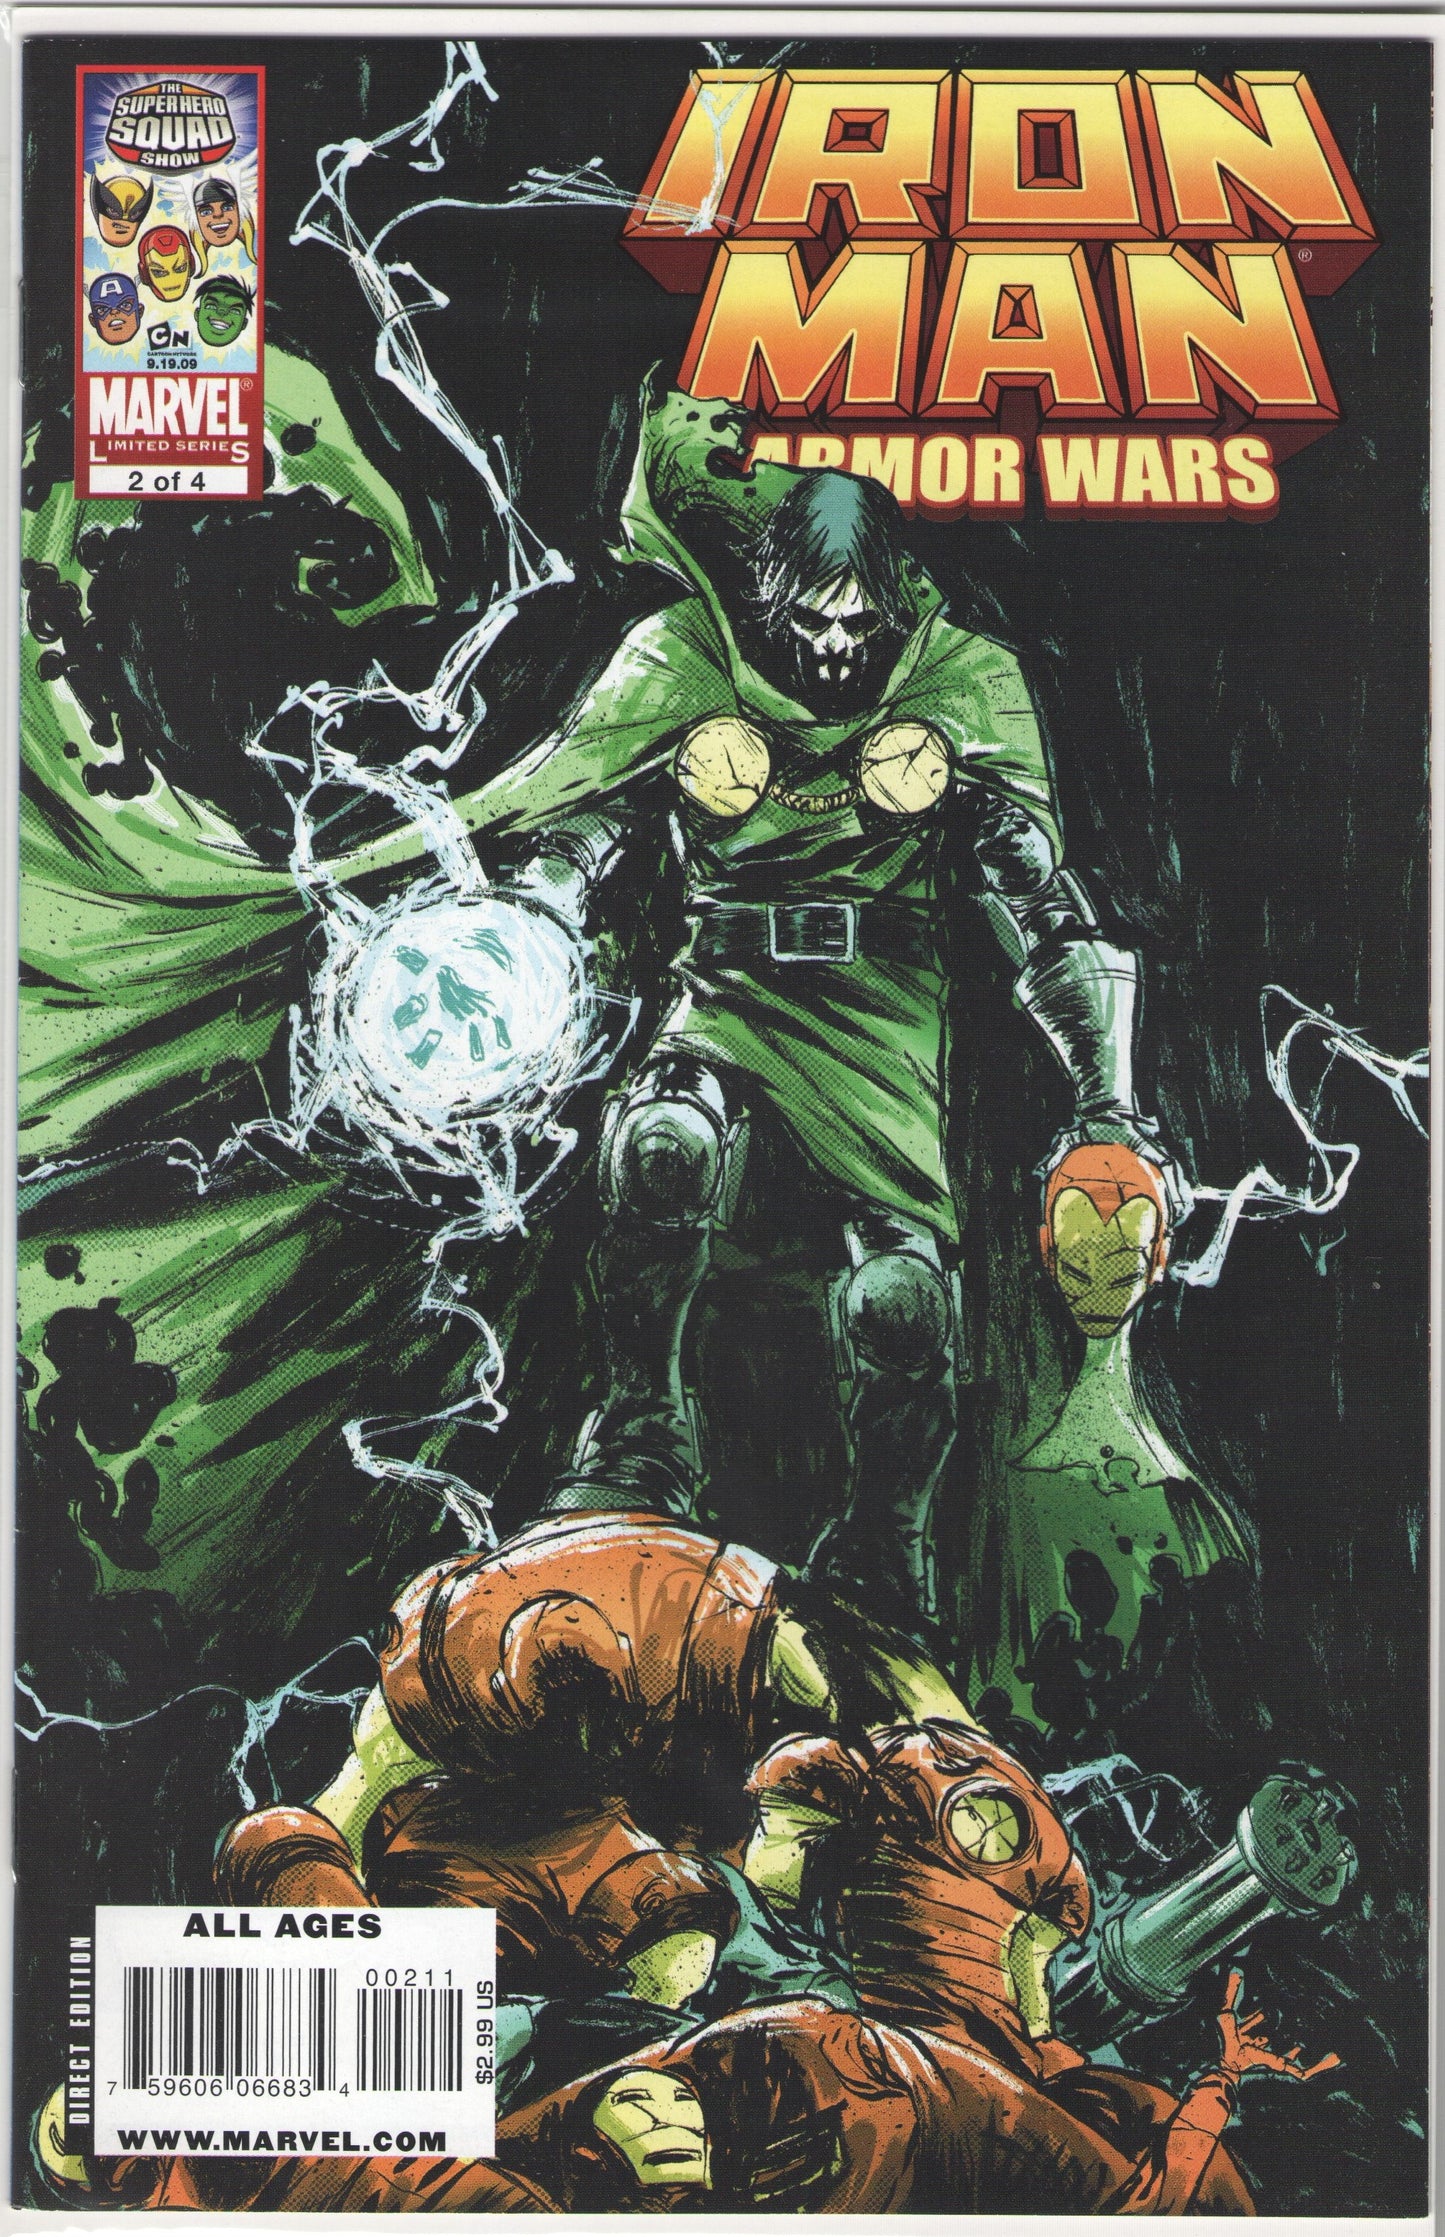 Iron Man & The Armor Wars (2009) Complete Limited Series